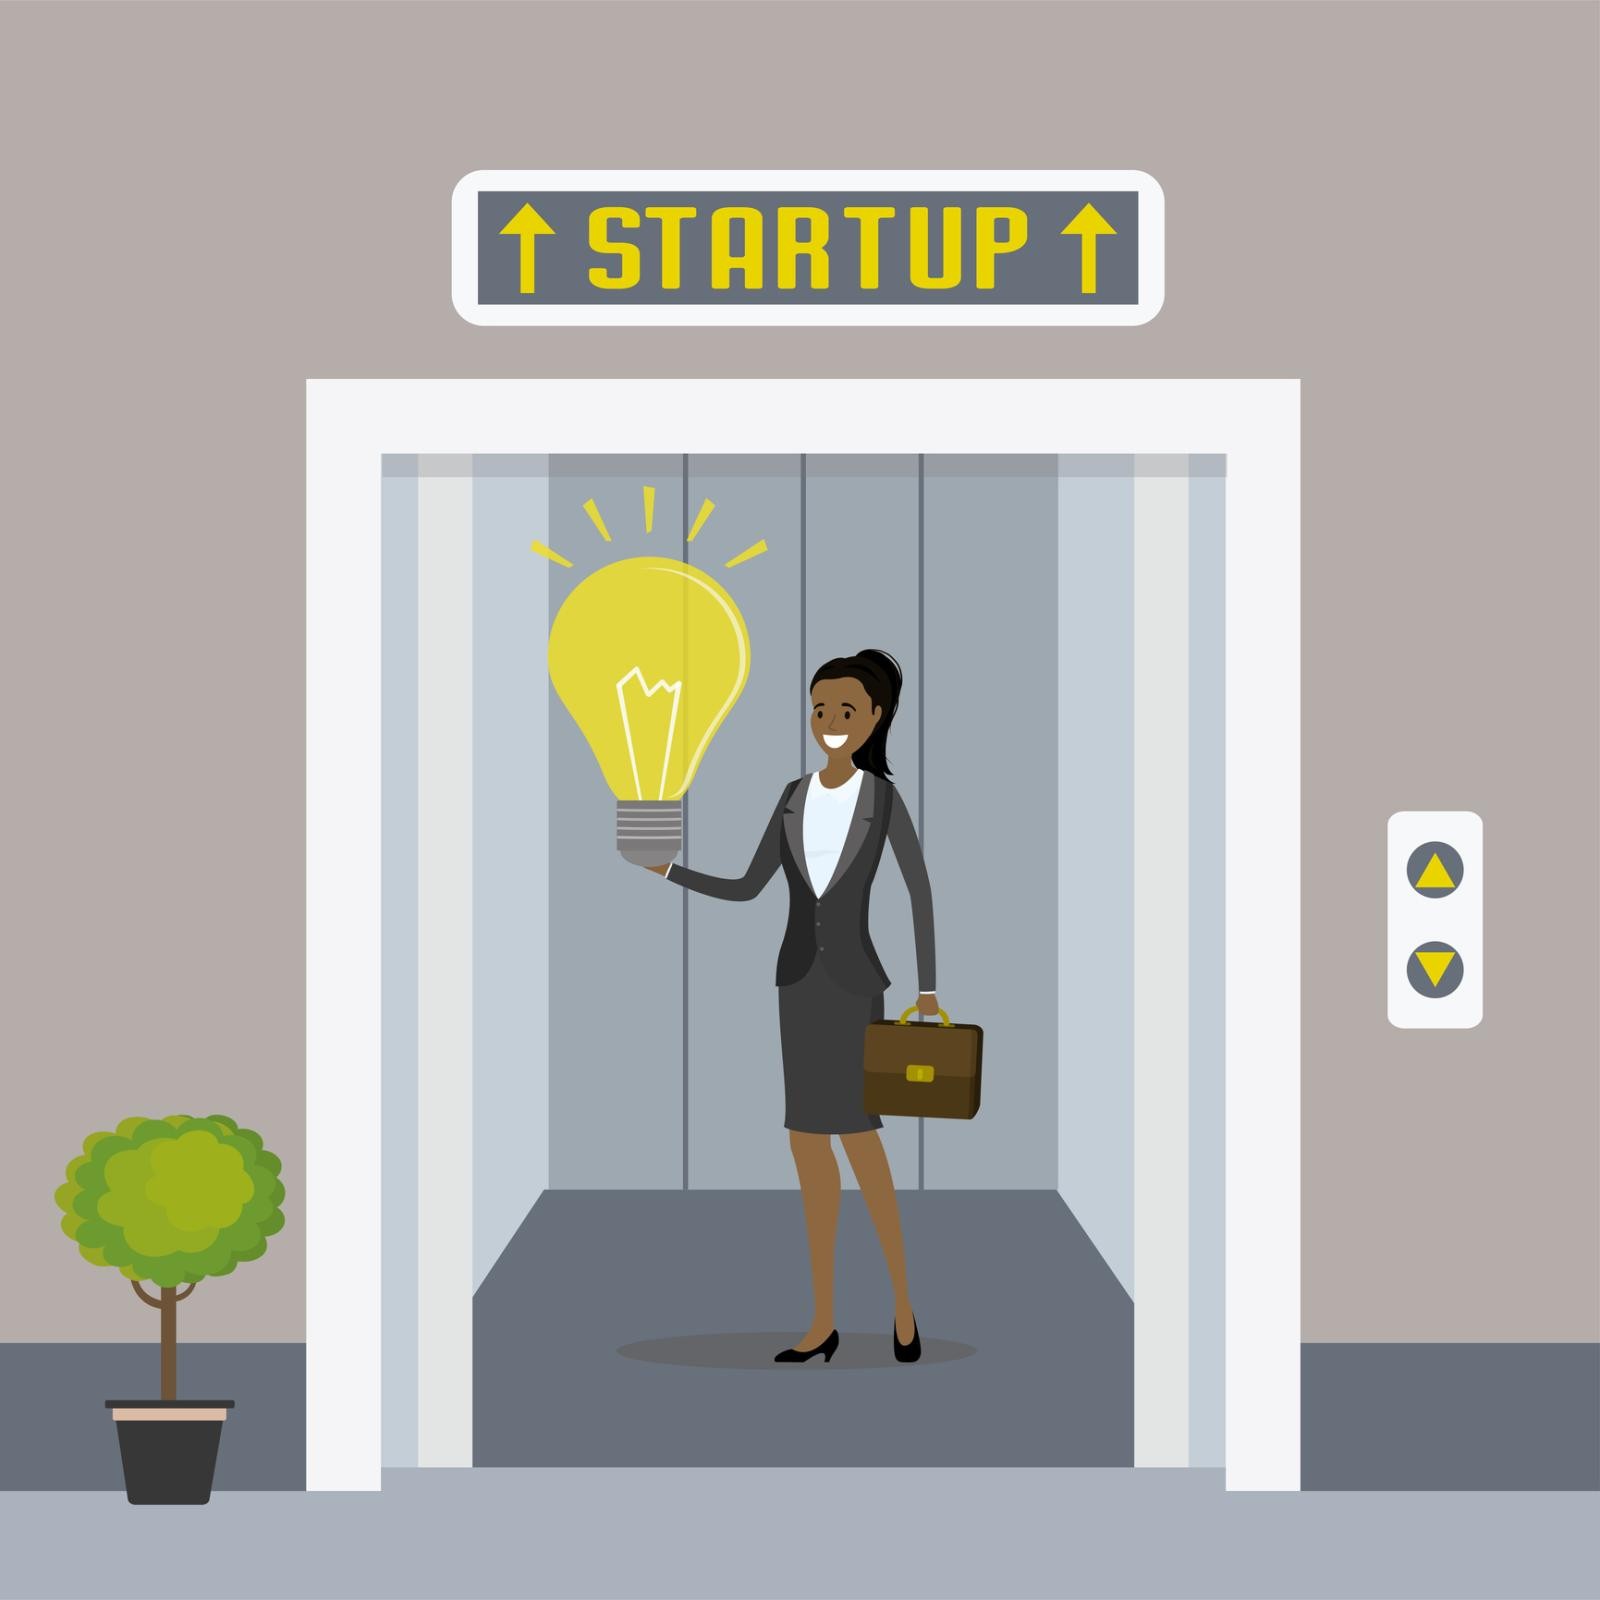 illustration of woman in elevator with lightbulb in hand and word "startup" above elevator